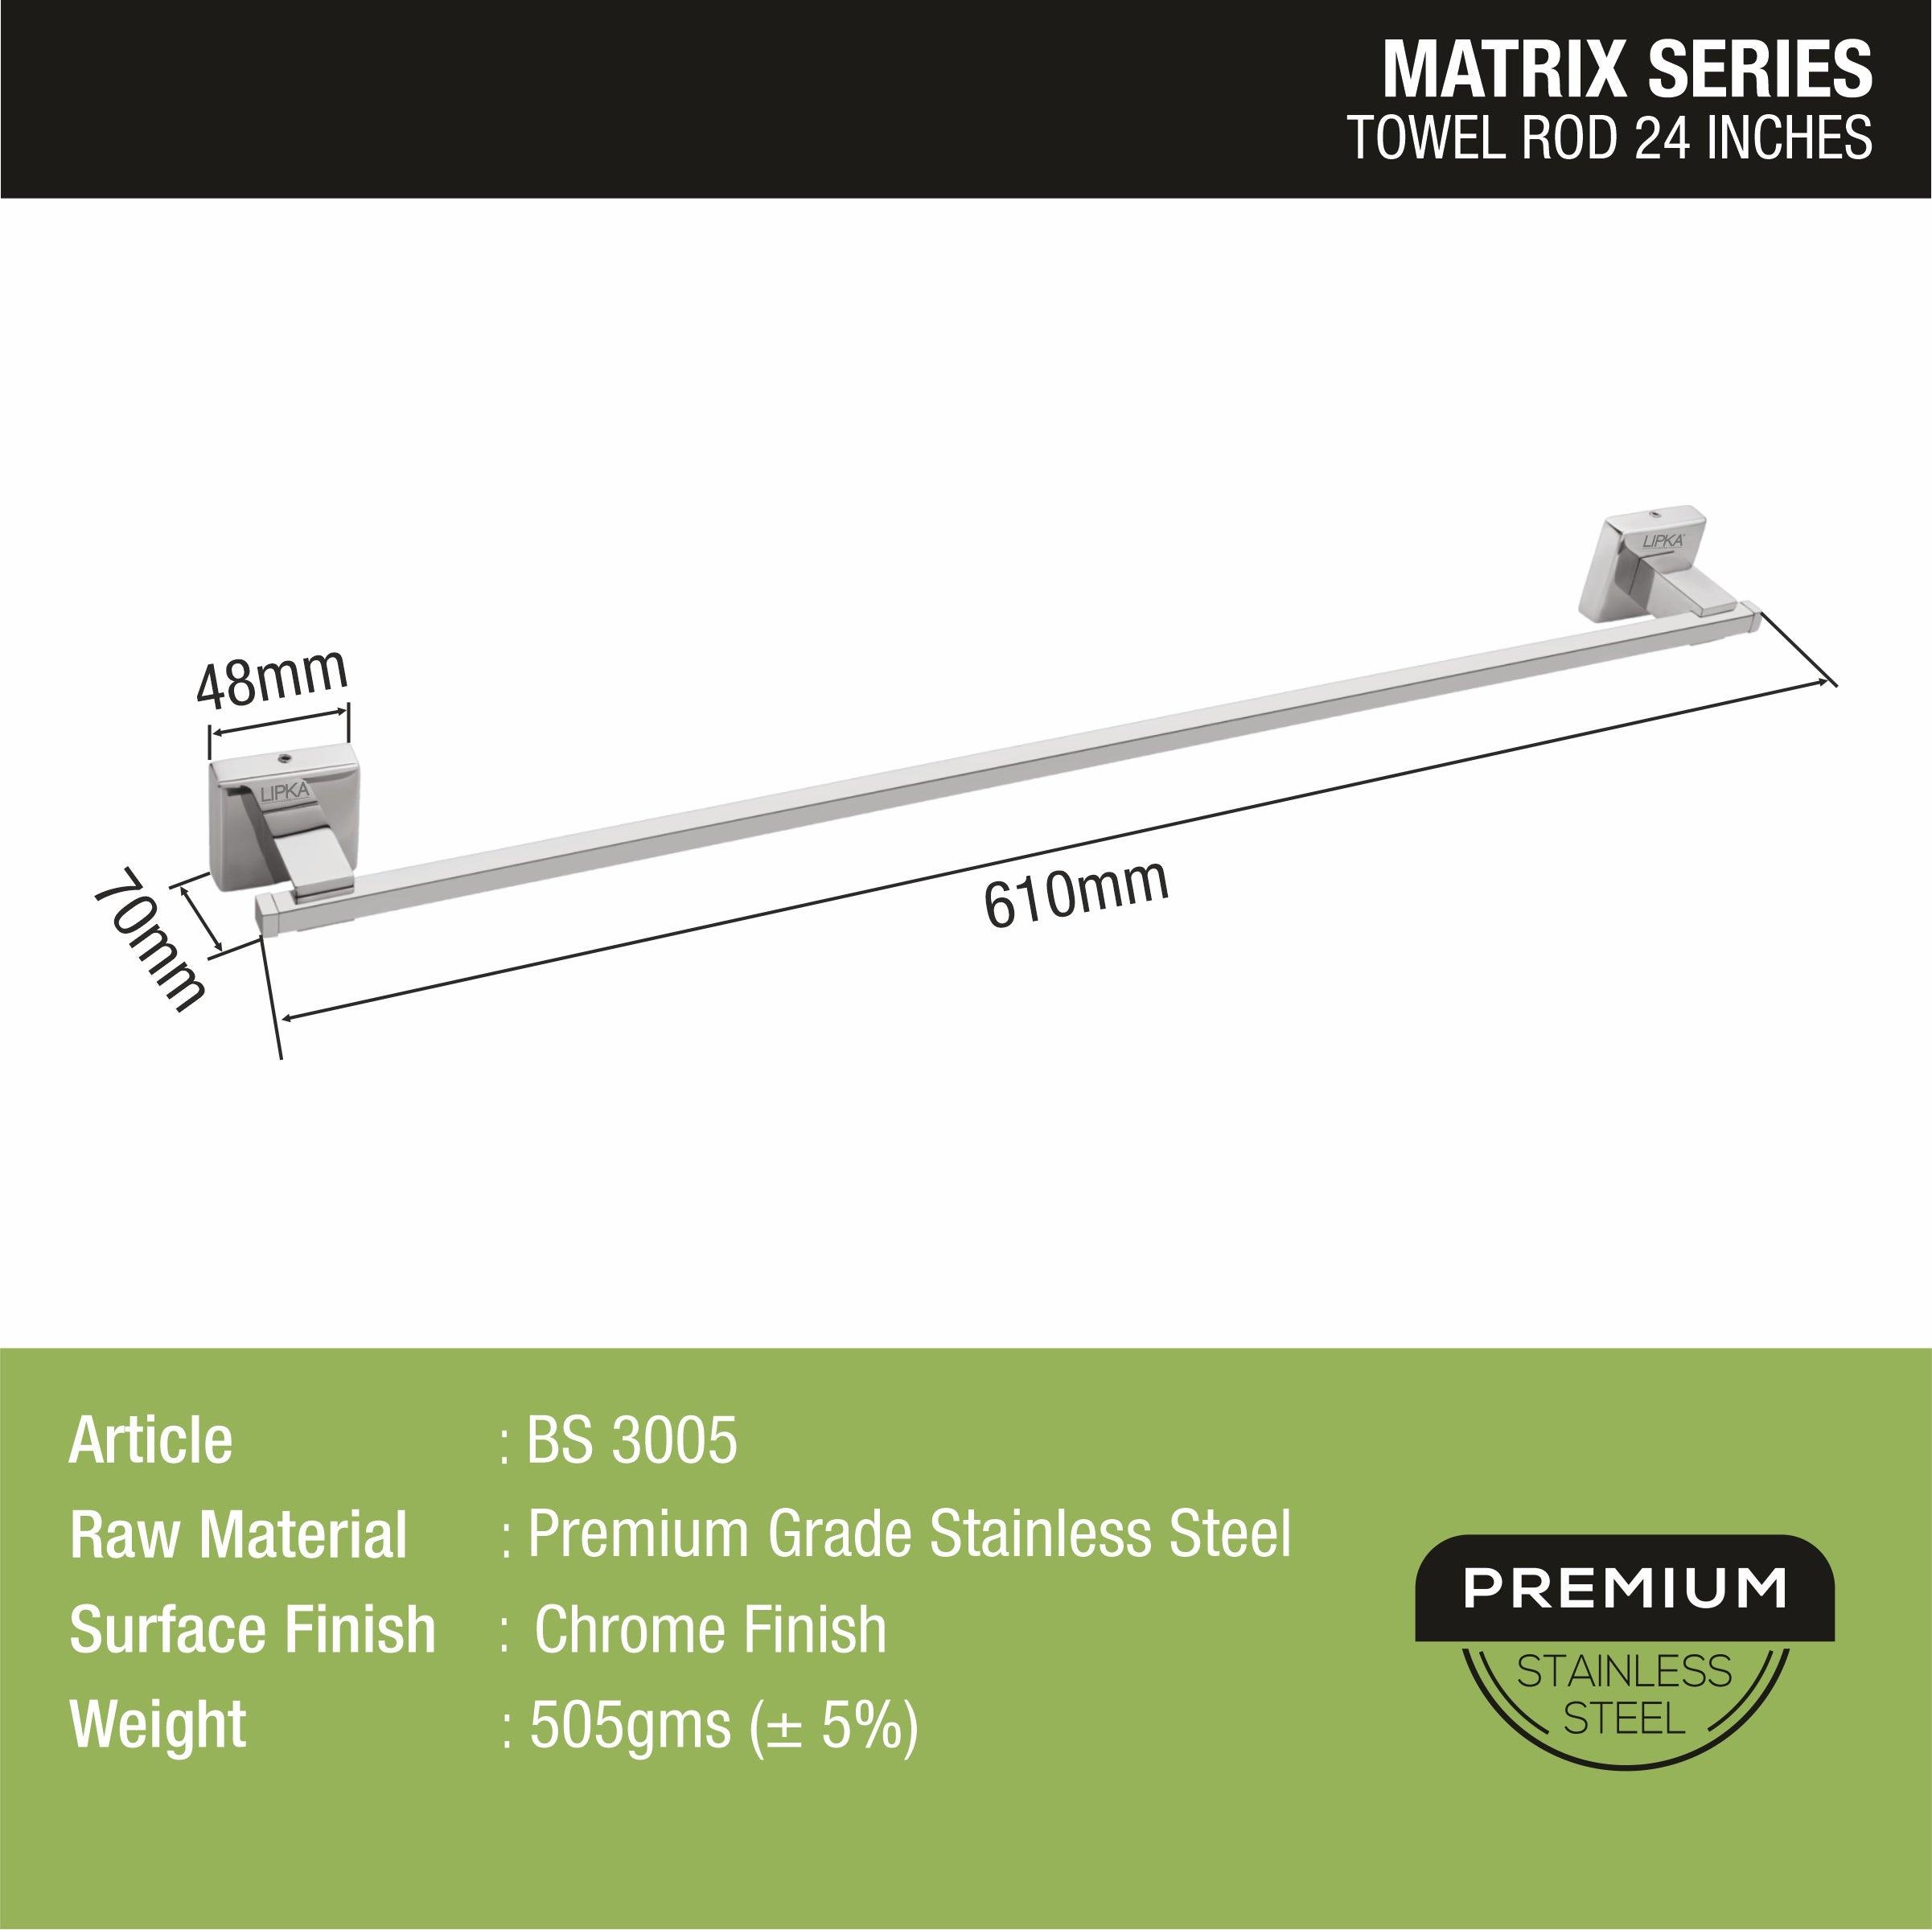 Matrix Towel Rod (24 Inches) size and dimension